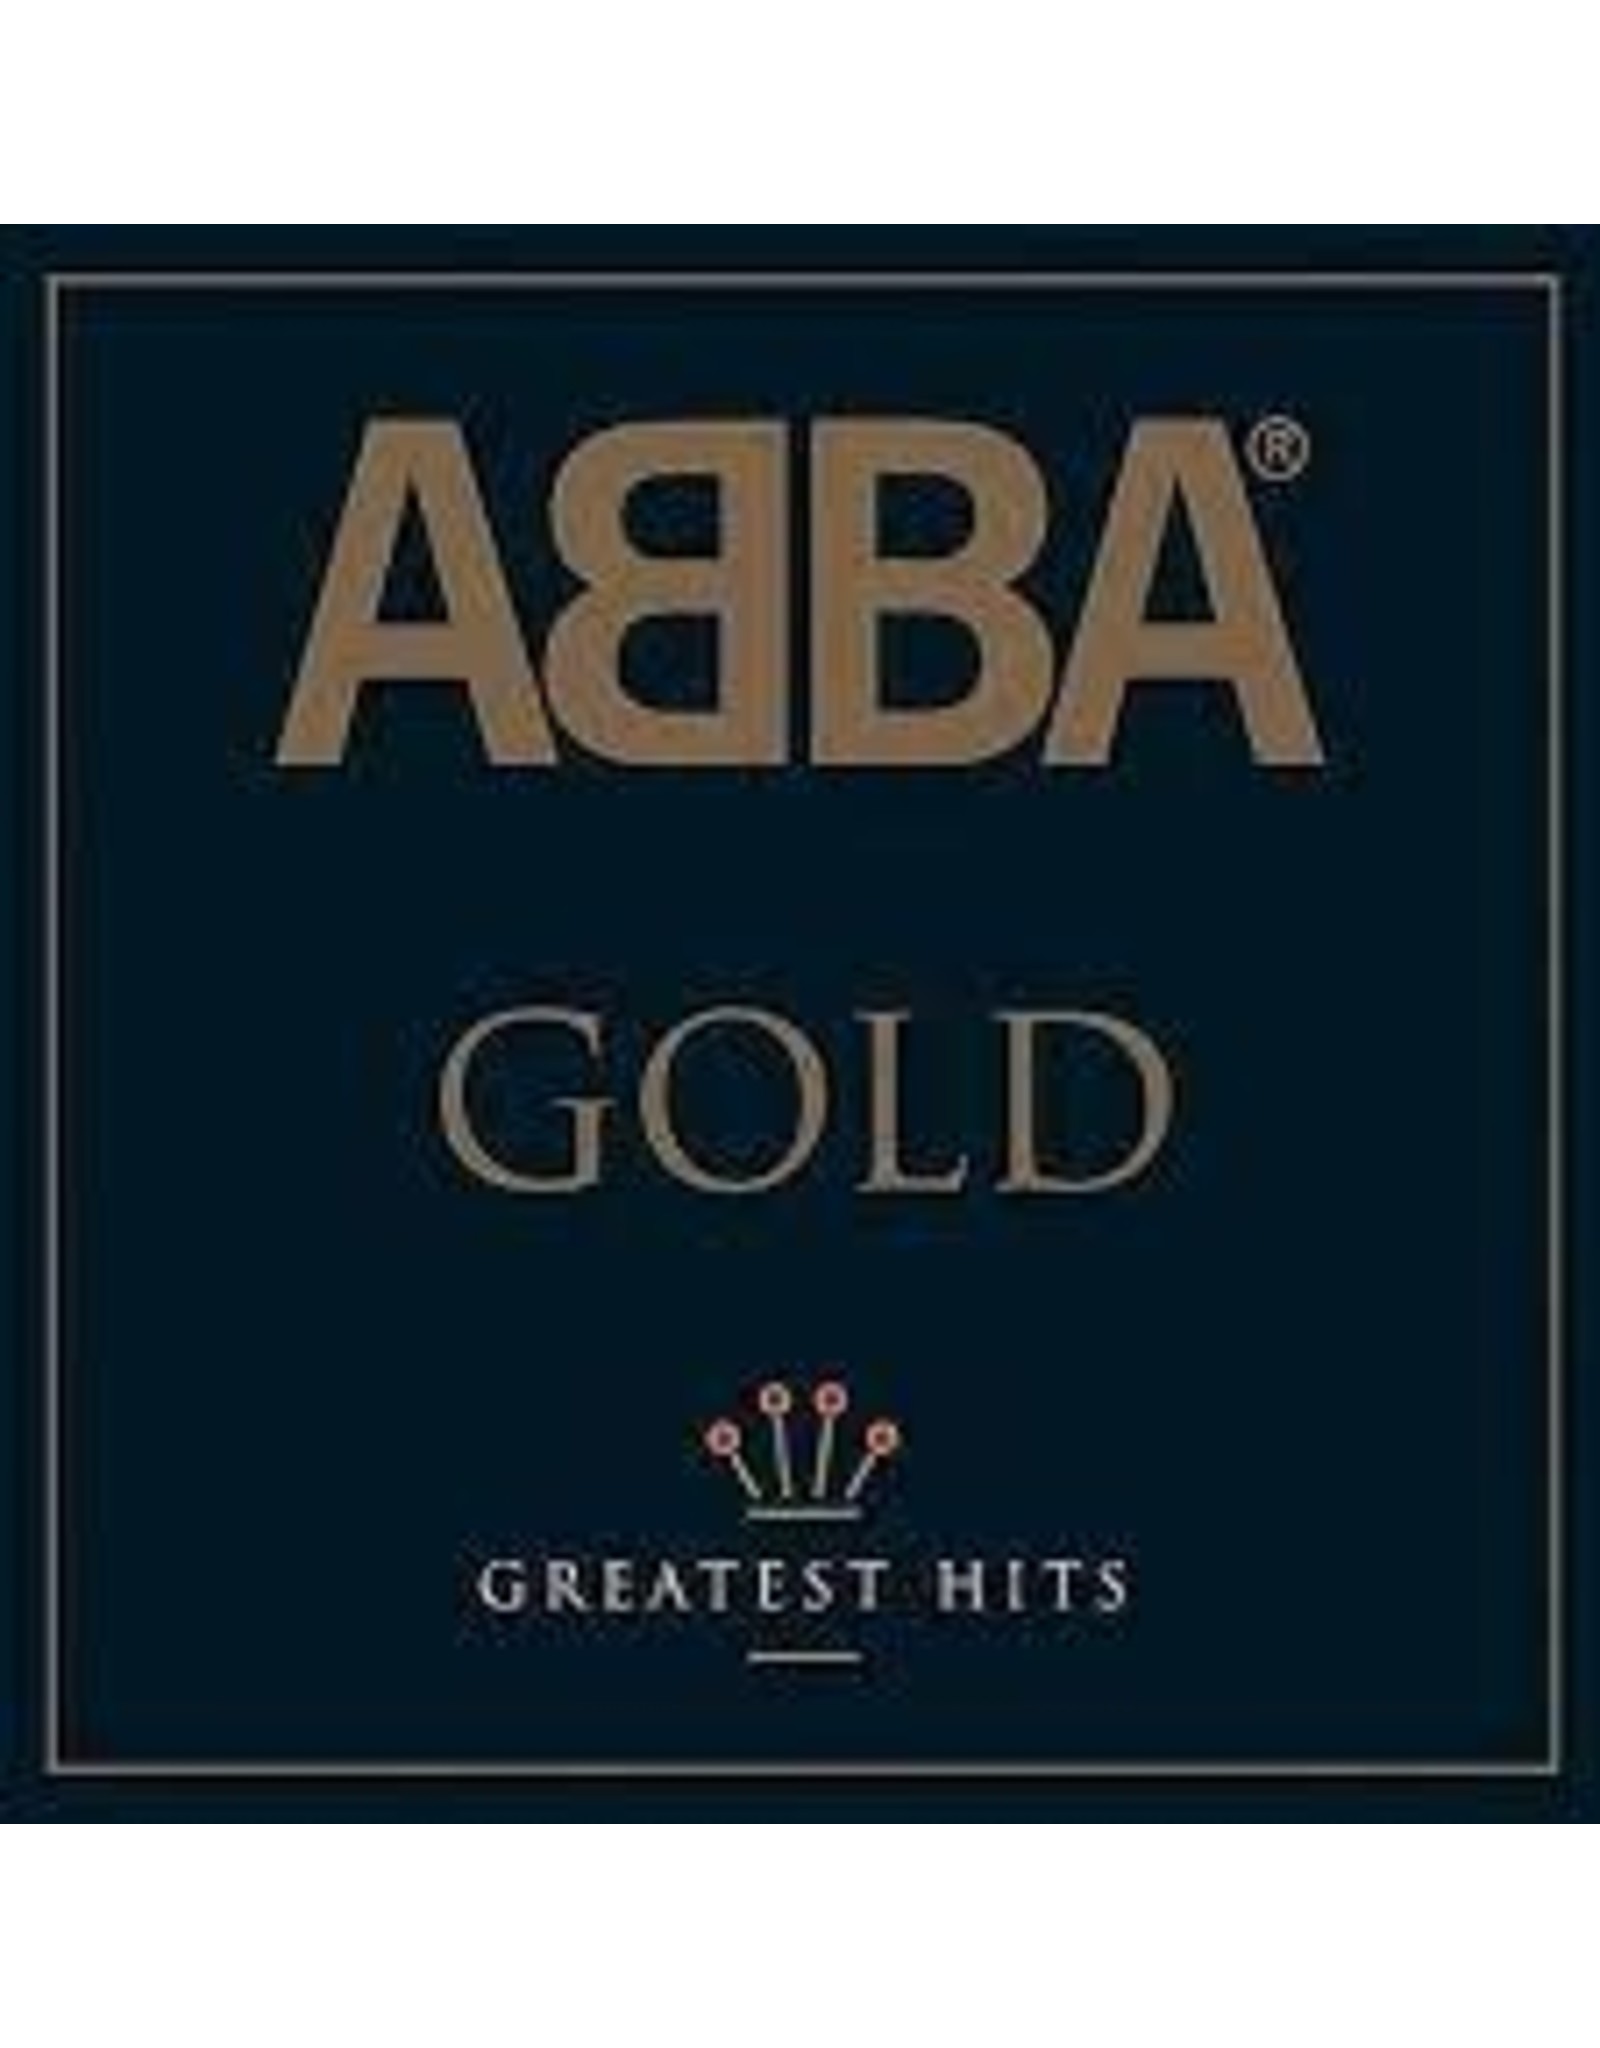 Abba - Gold Greatest Hits CD